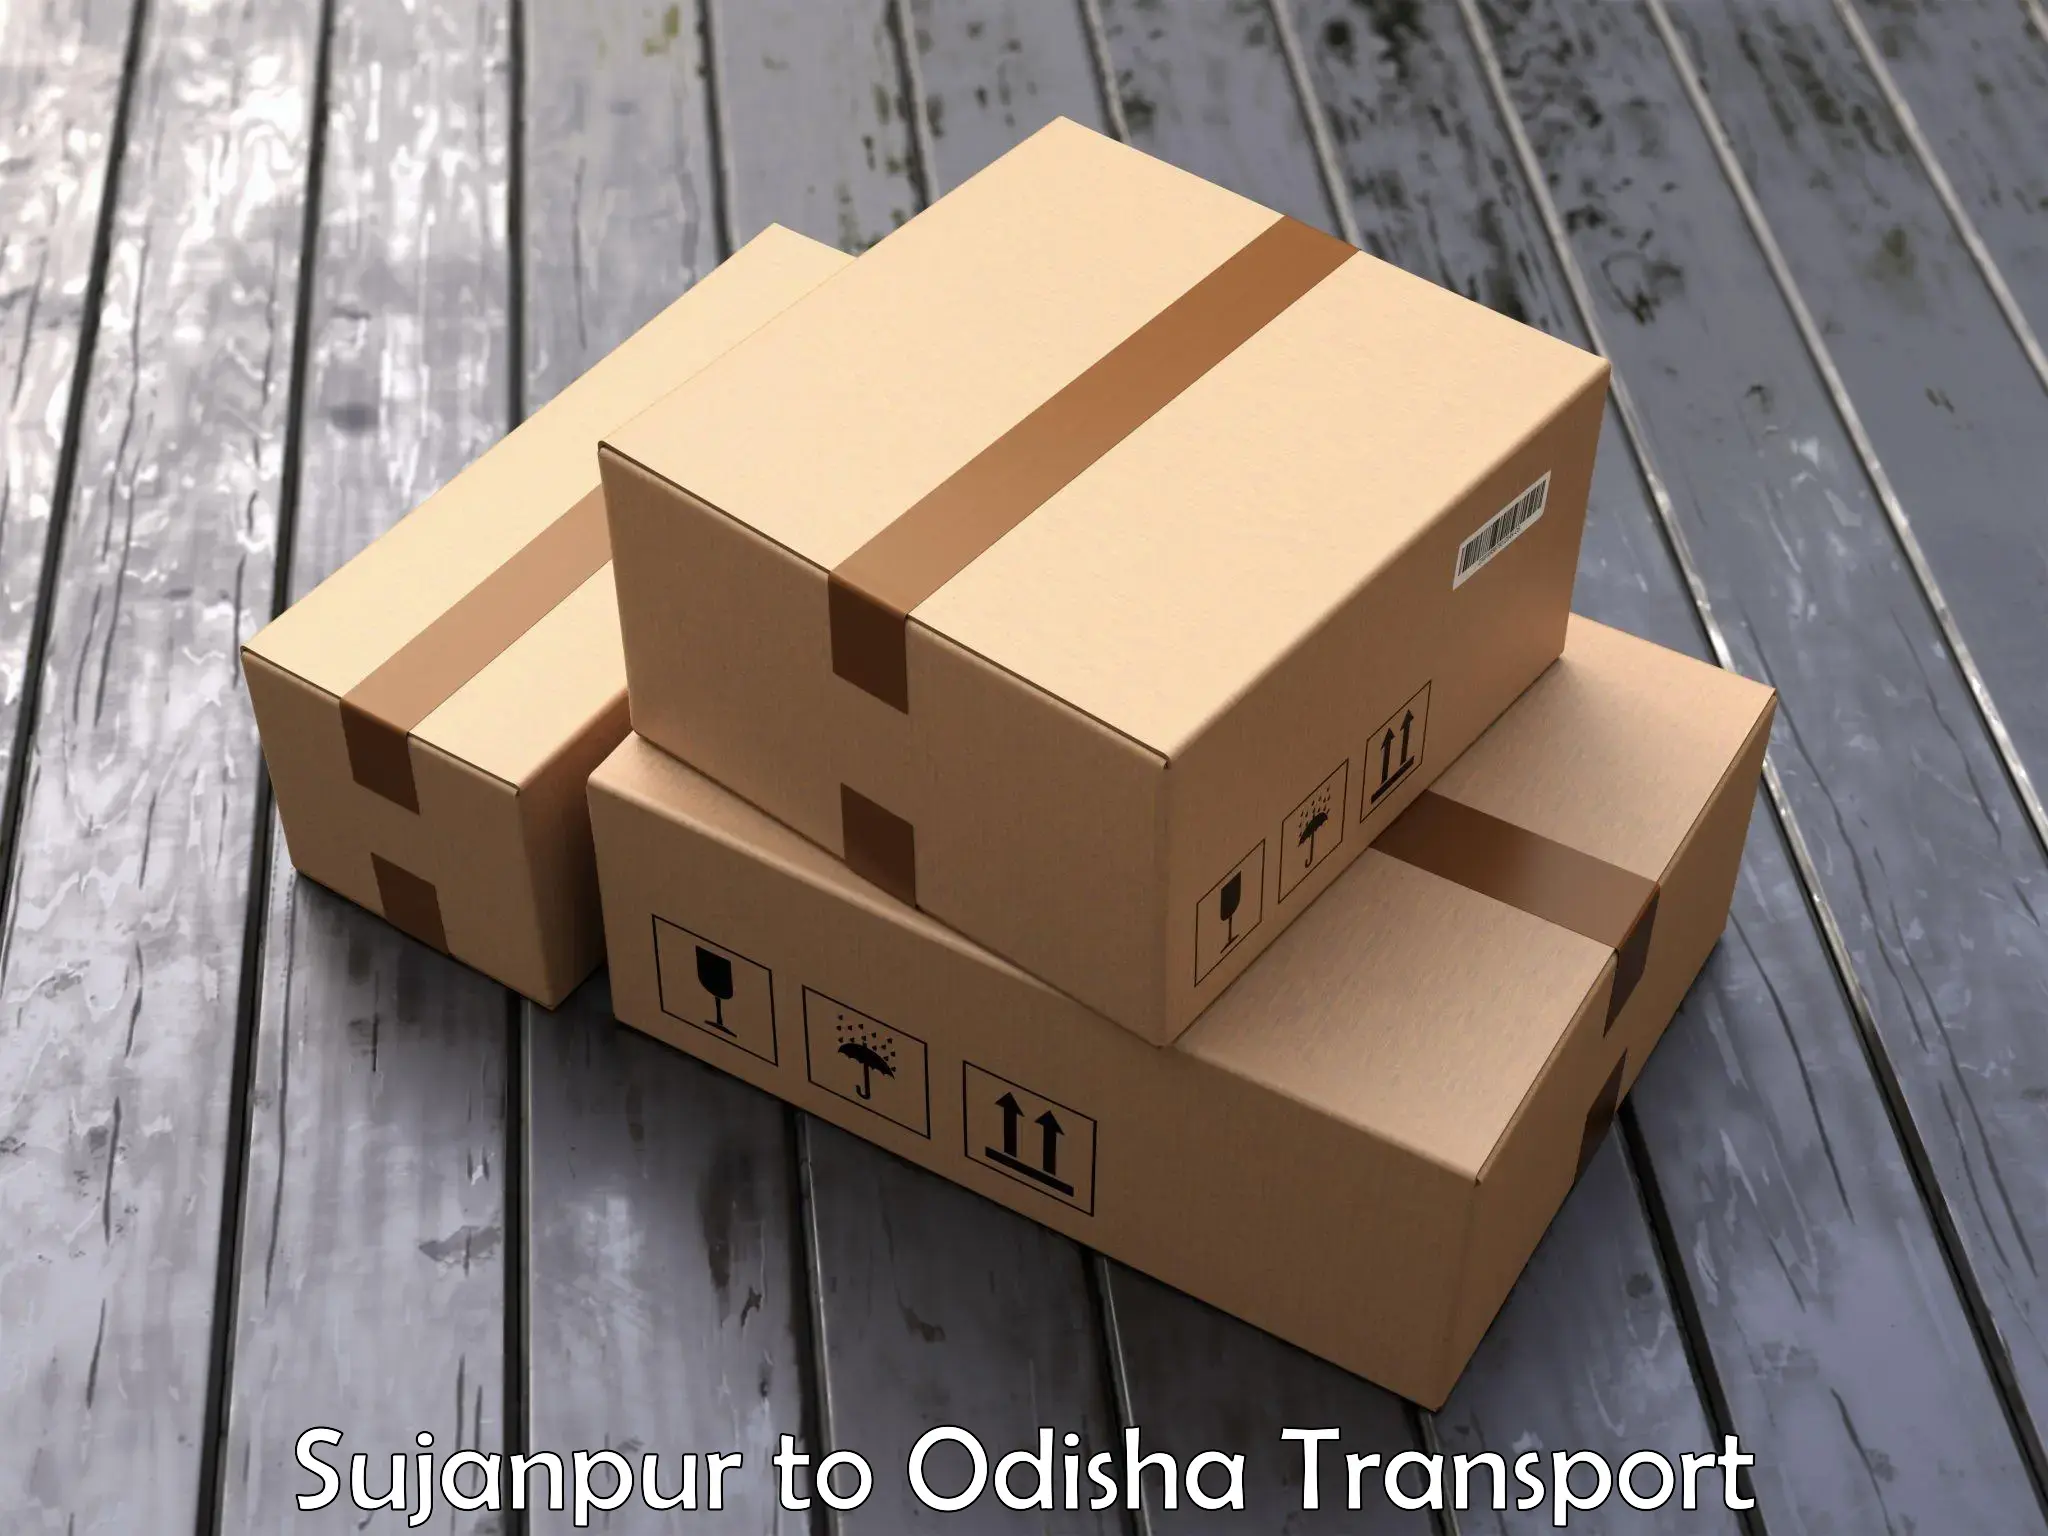 Truck transport companies in India Sujanpur to Chandinchowk